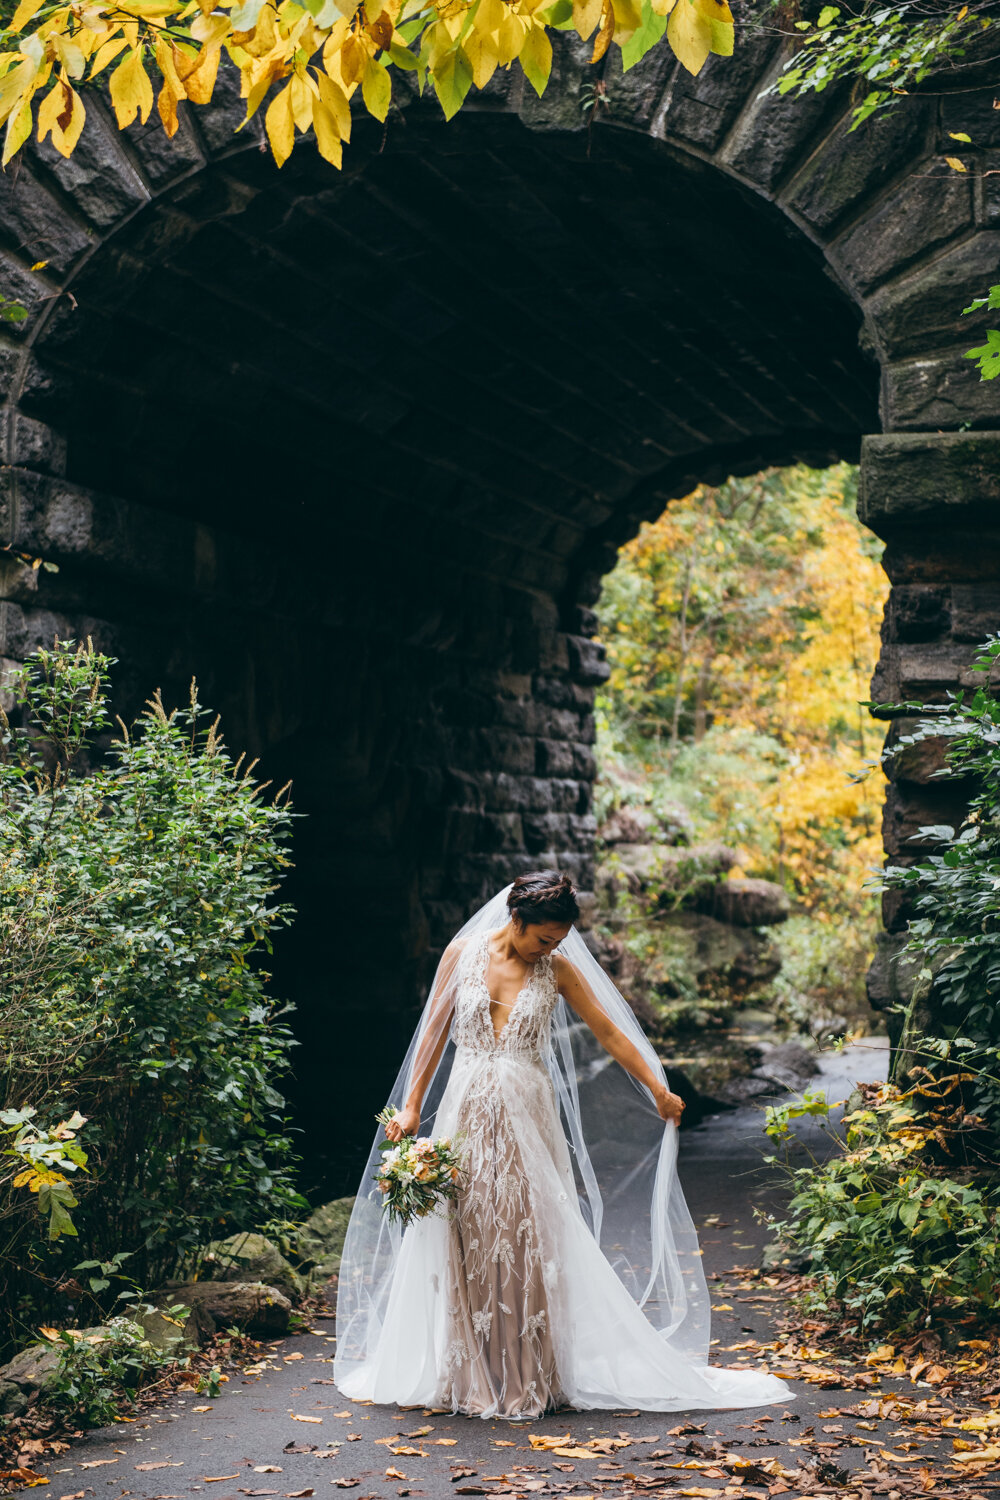 Bride stands beneath a stone archway in Central Park. She is holding her veil and looking down.

Central Park Wedding Photography. Williamsburg Bridge Bridal Portraits. Luxury NYC Wedding Photographer. Manhattan Micro Wedding.